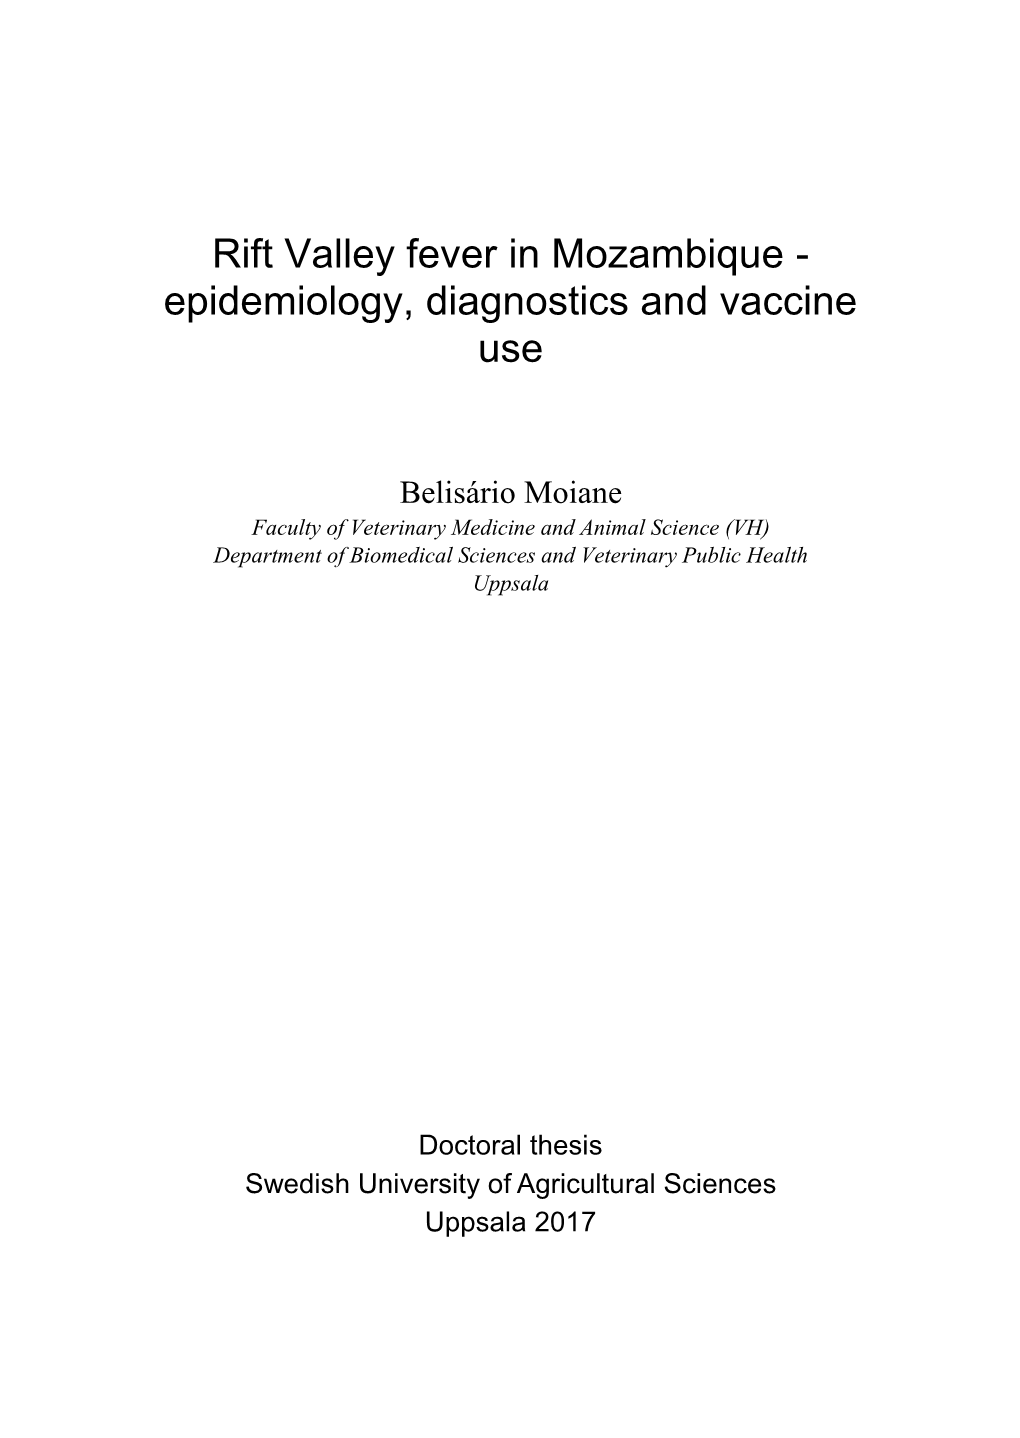 Rift Valley Fever in Mozambique - Epidemiology, Diagnostics and Vaccine Use